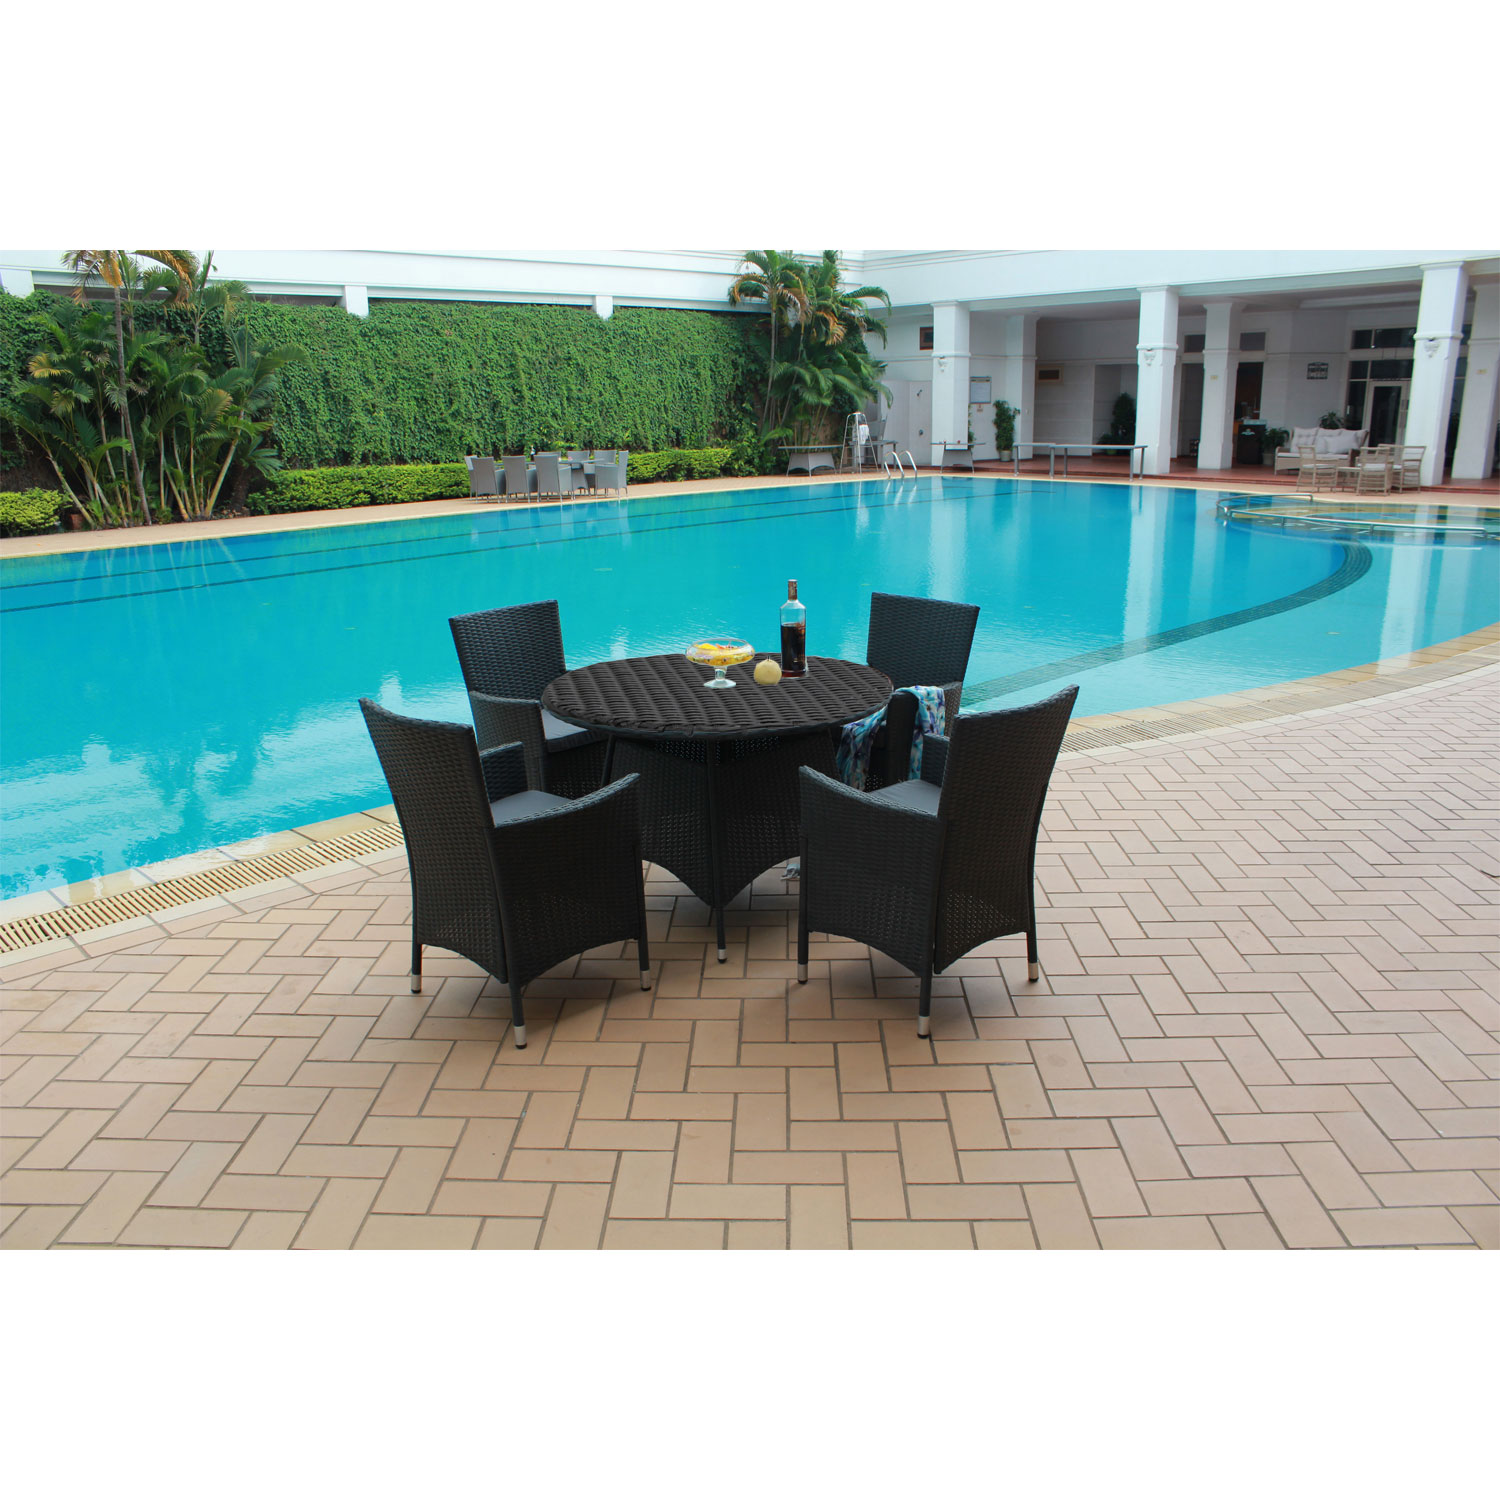 outdoor kitchens patio furniture